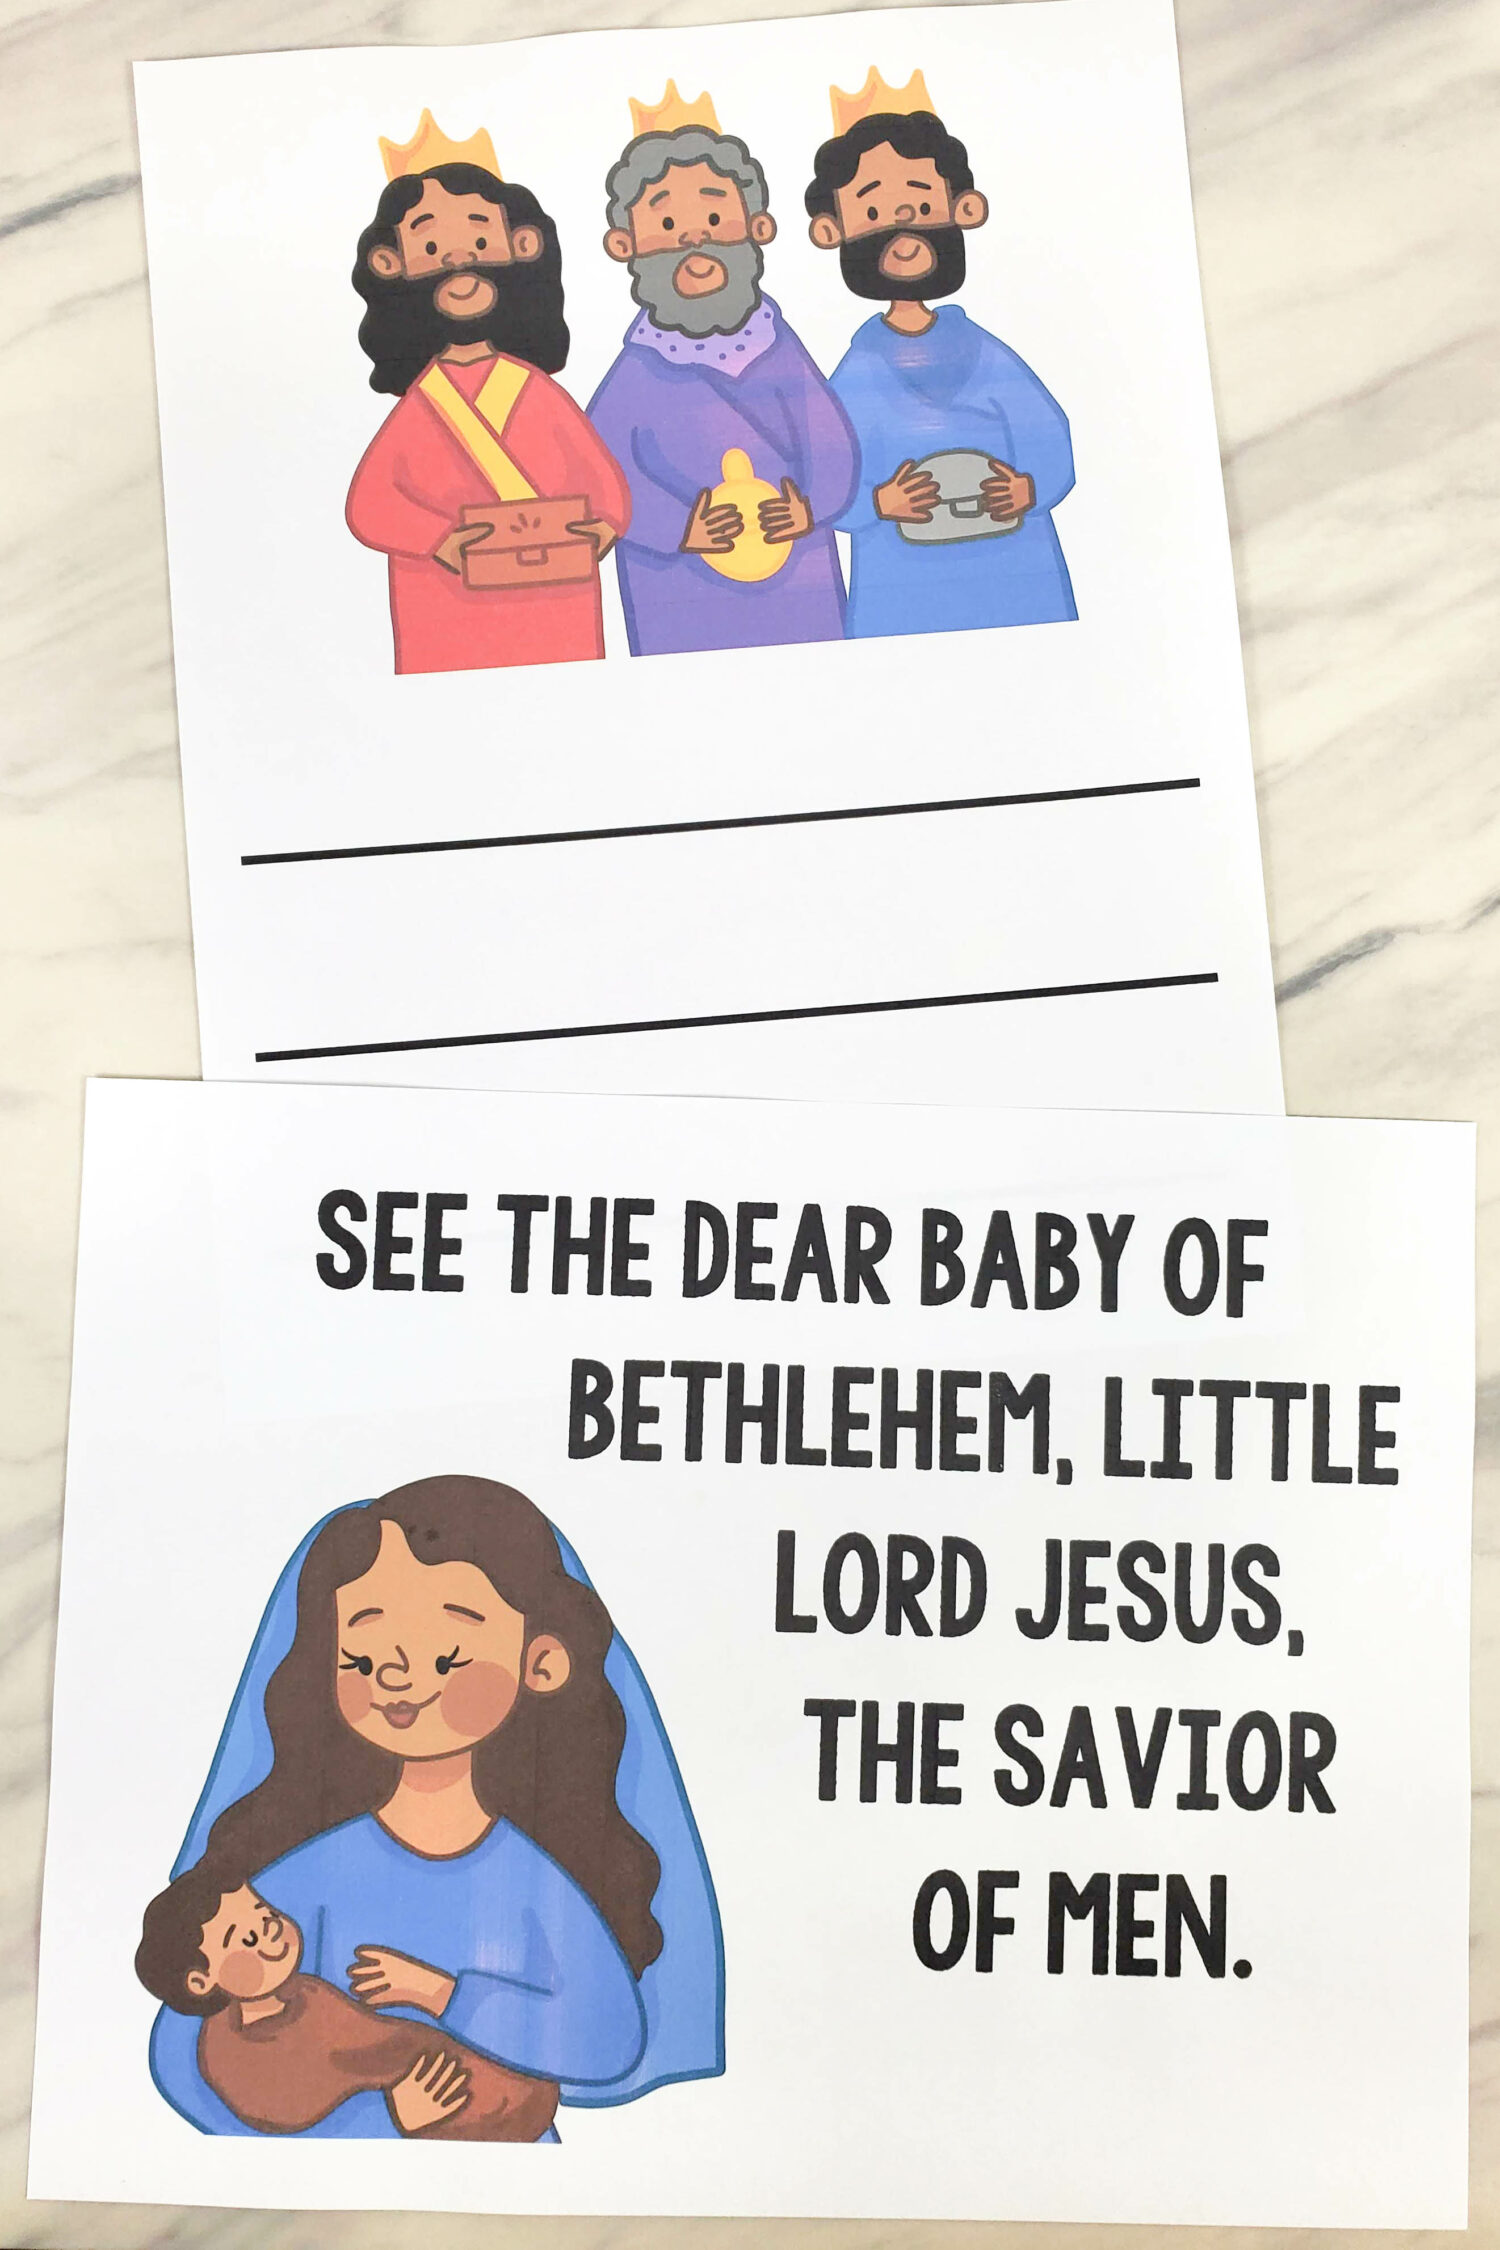 The Nativity Song Flip Chart Teach this beautiful Primary Christmas song that talks about each of the symbols of Christmas perfect for your Sunday Christmas meeting. Printable resource for LDS Primary Music leaders or Christian song helps.